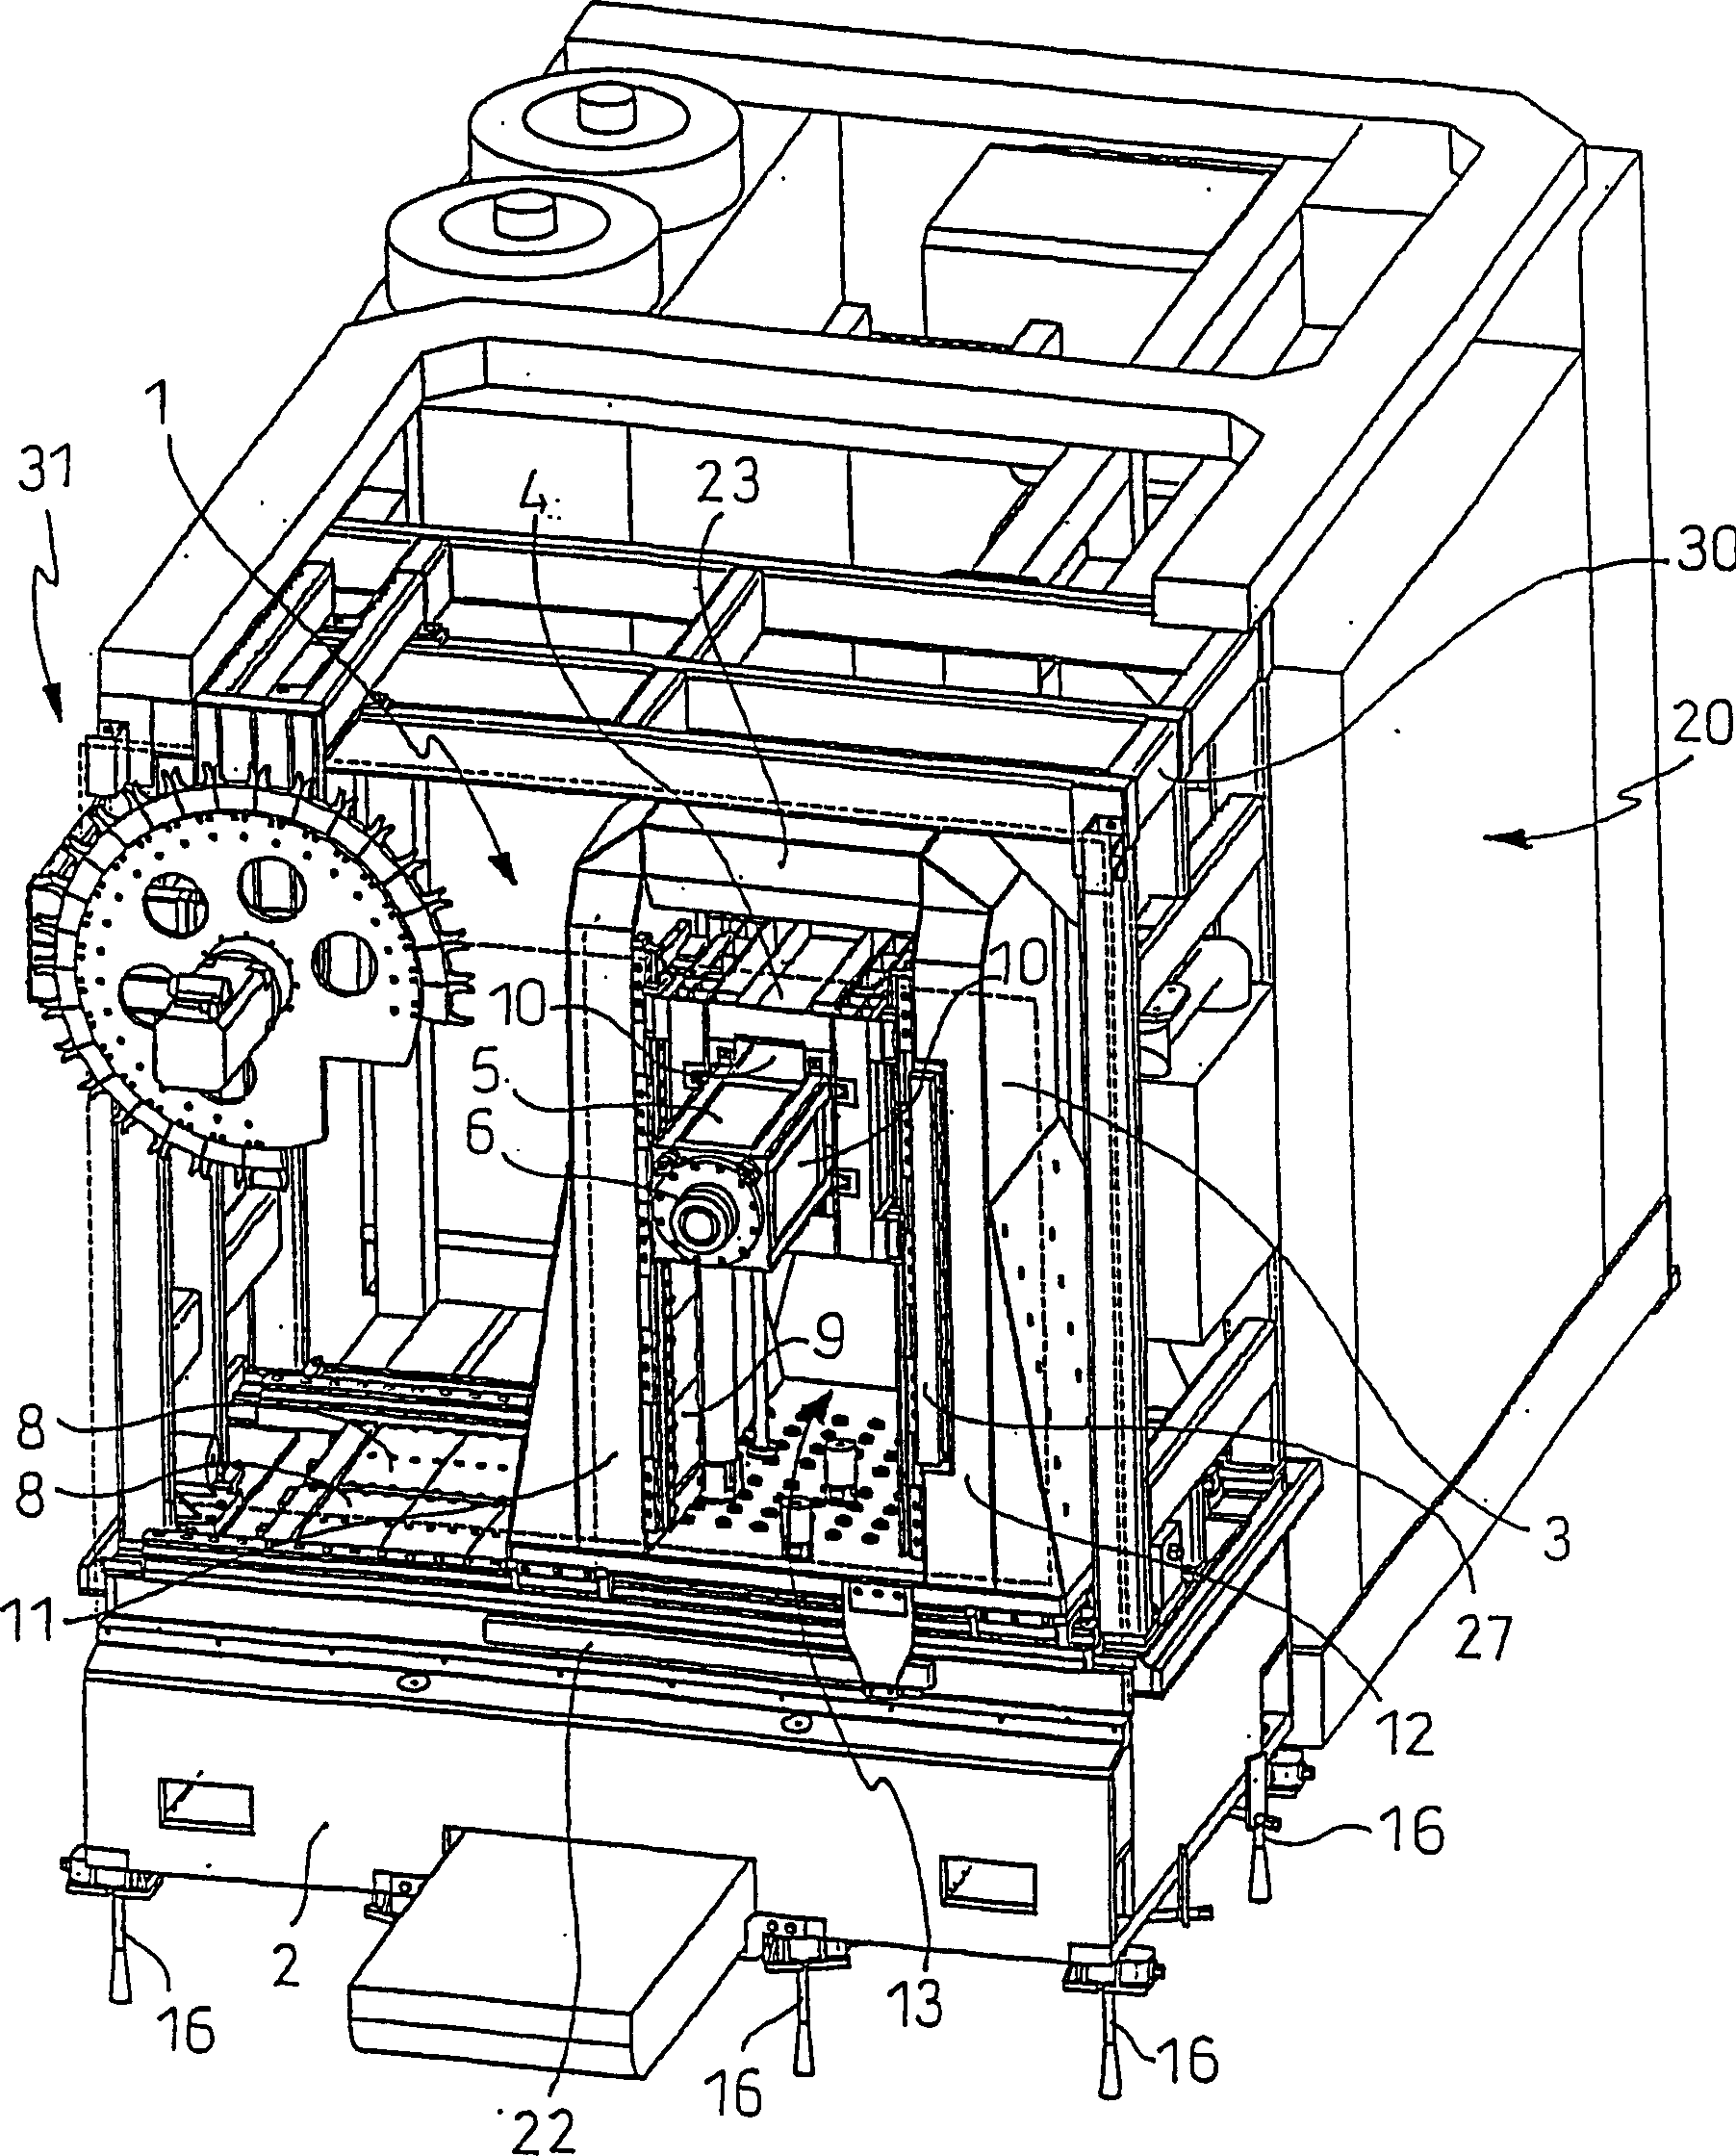 Multi-axial electric machinery process equipment